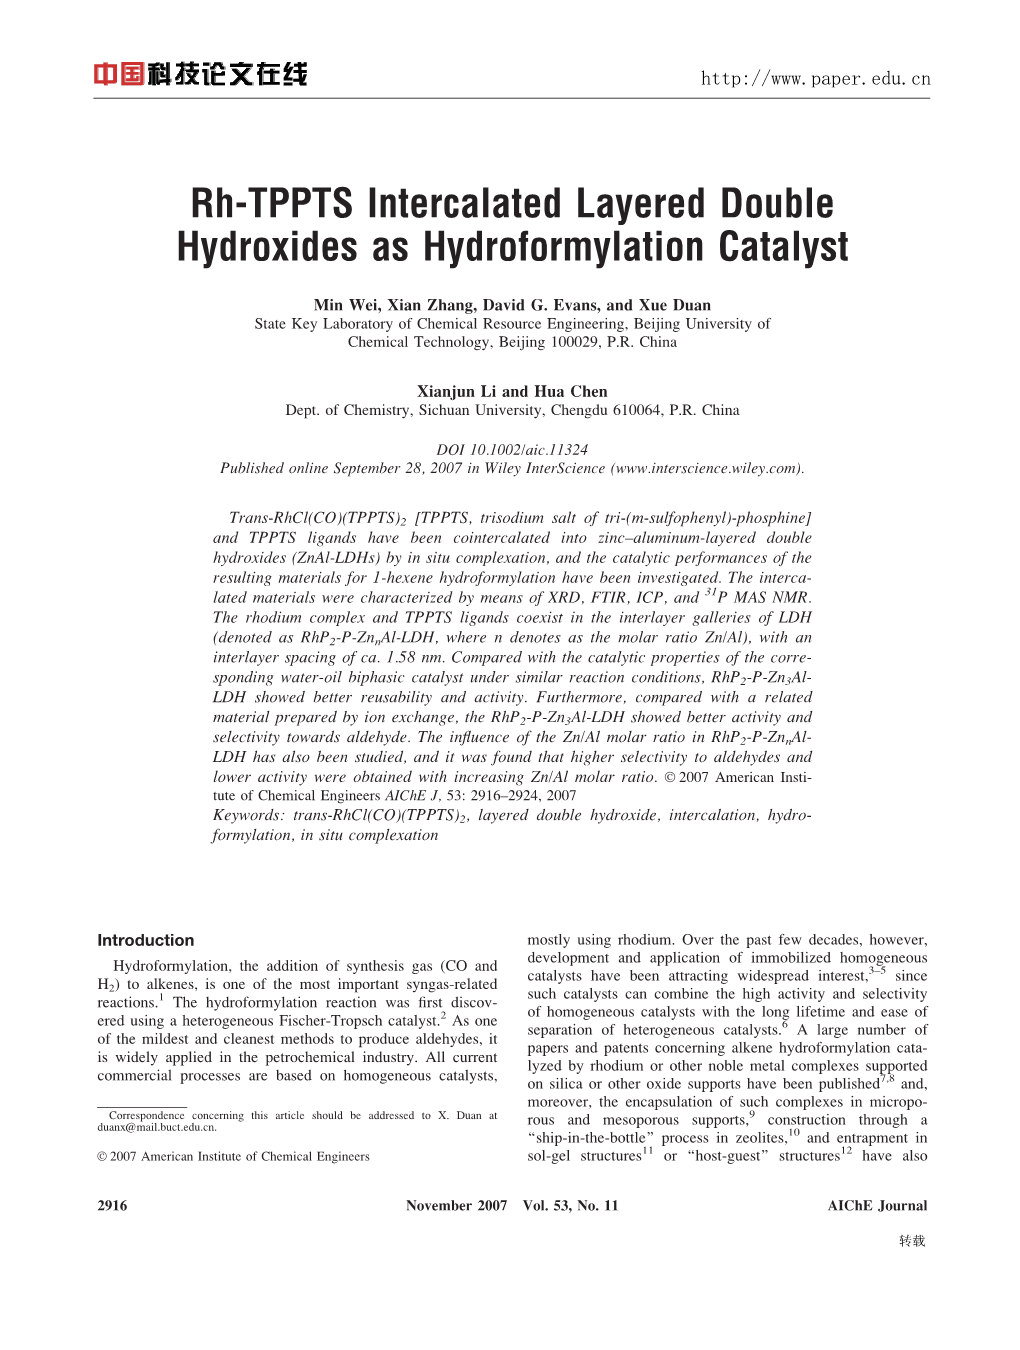 Rh-TPPTS Intercalated Layered Double Hydroxides As Hydroformylation Catalyst